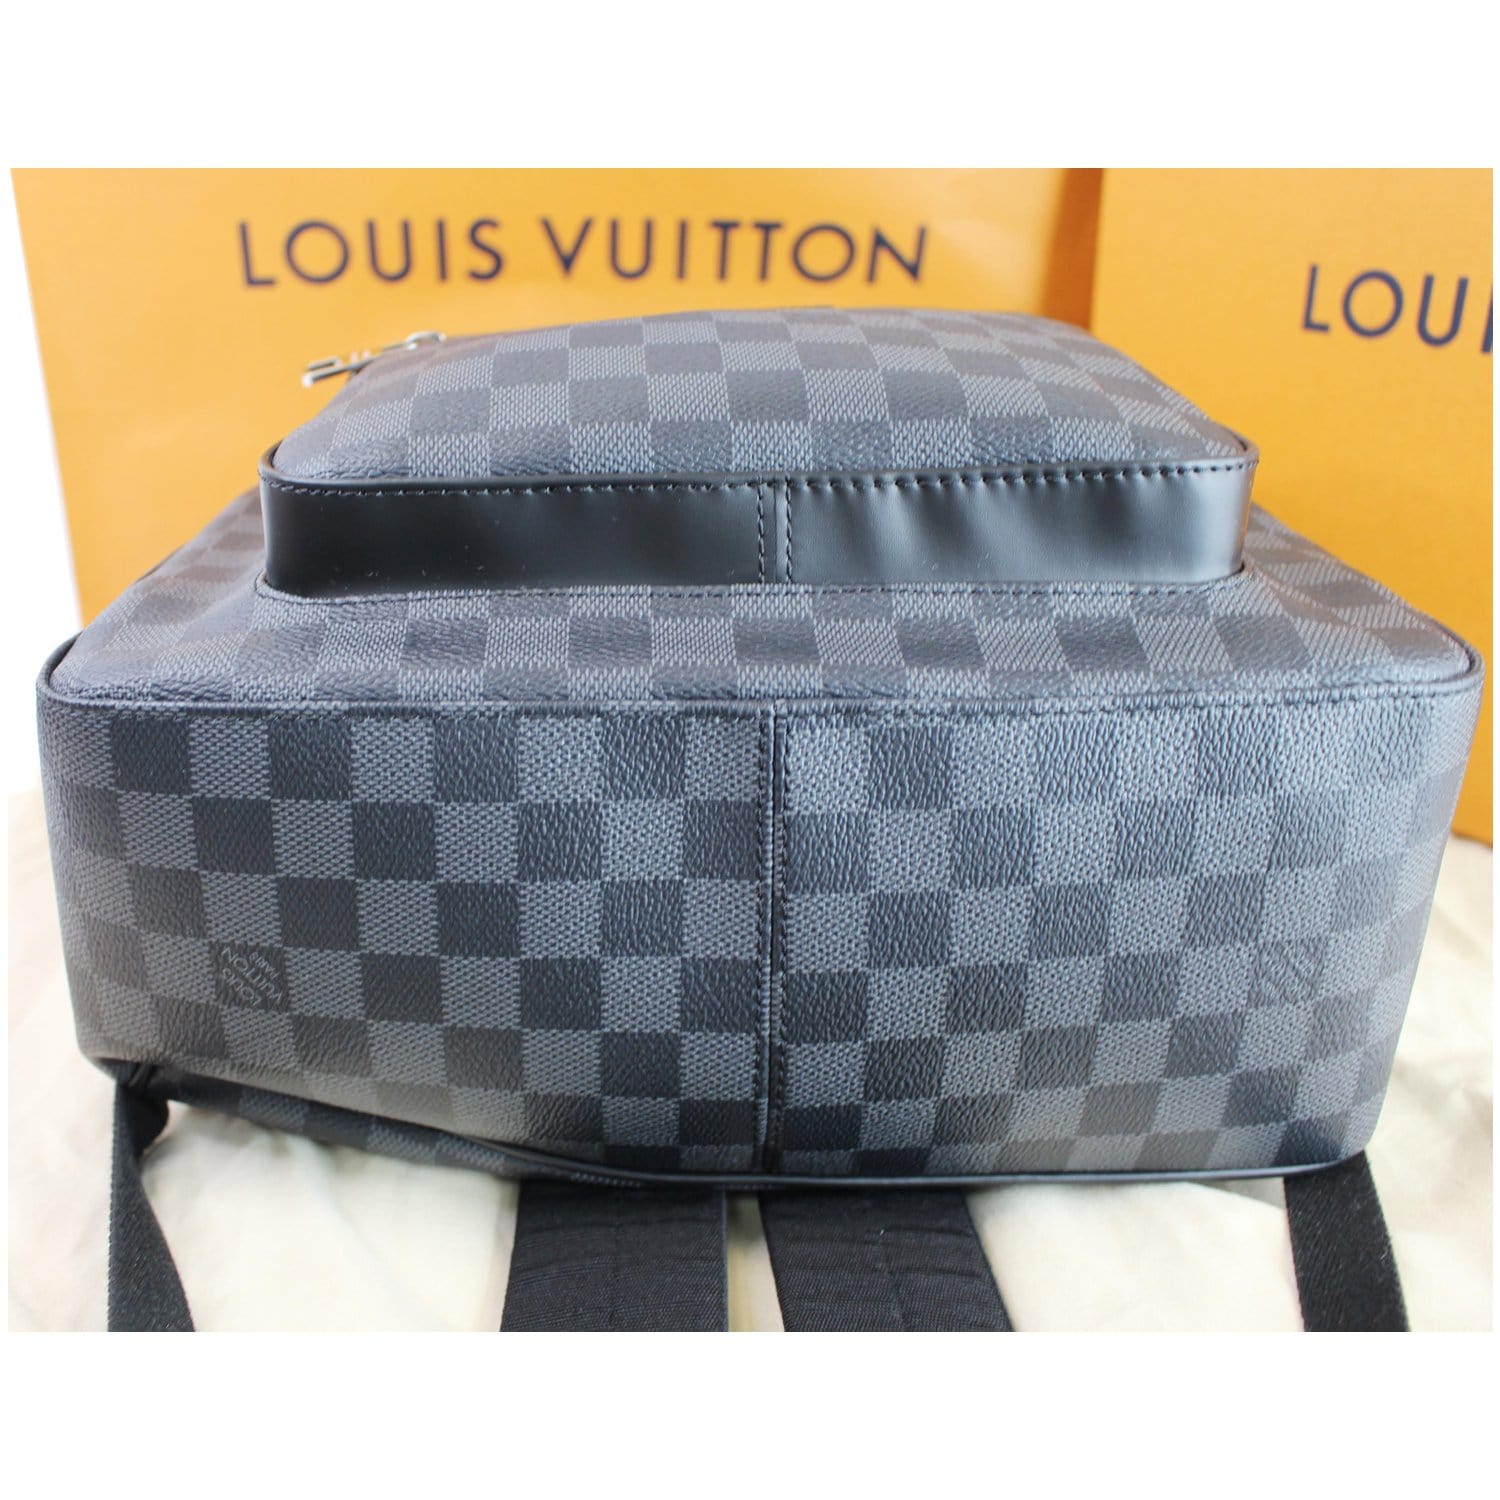 Louis Vuitton Damier Graphite Josh Backpack 87lk727s For Sale at